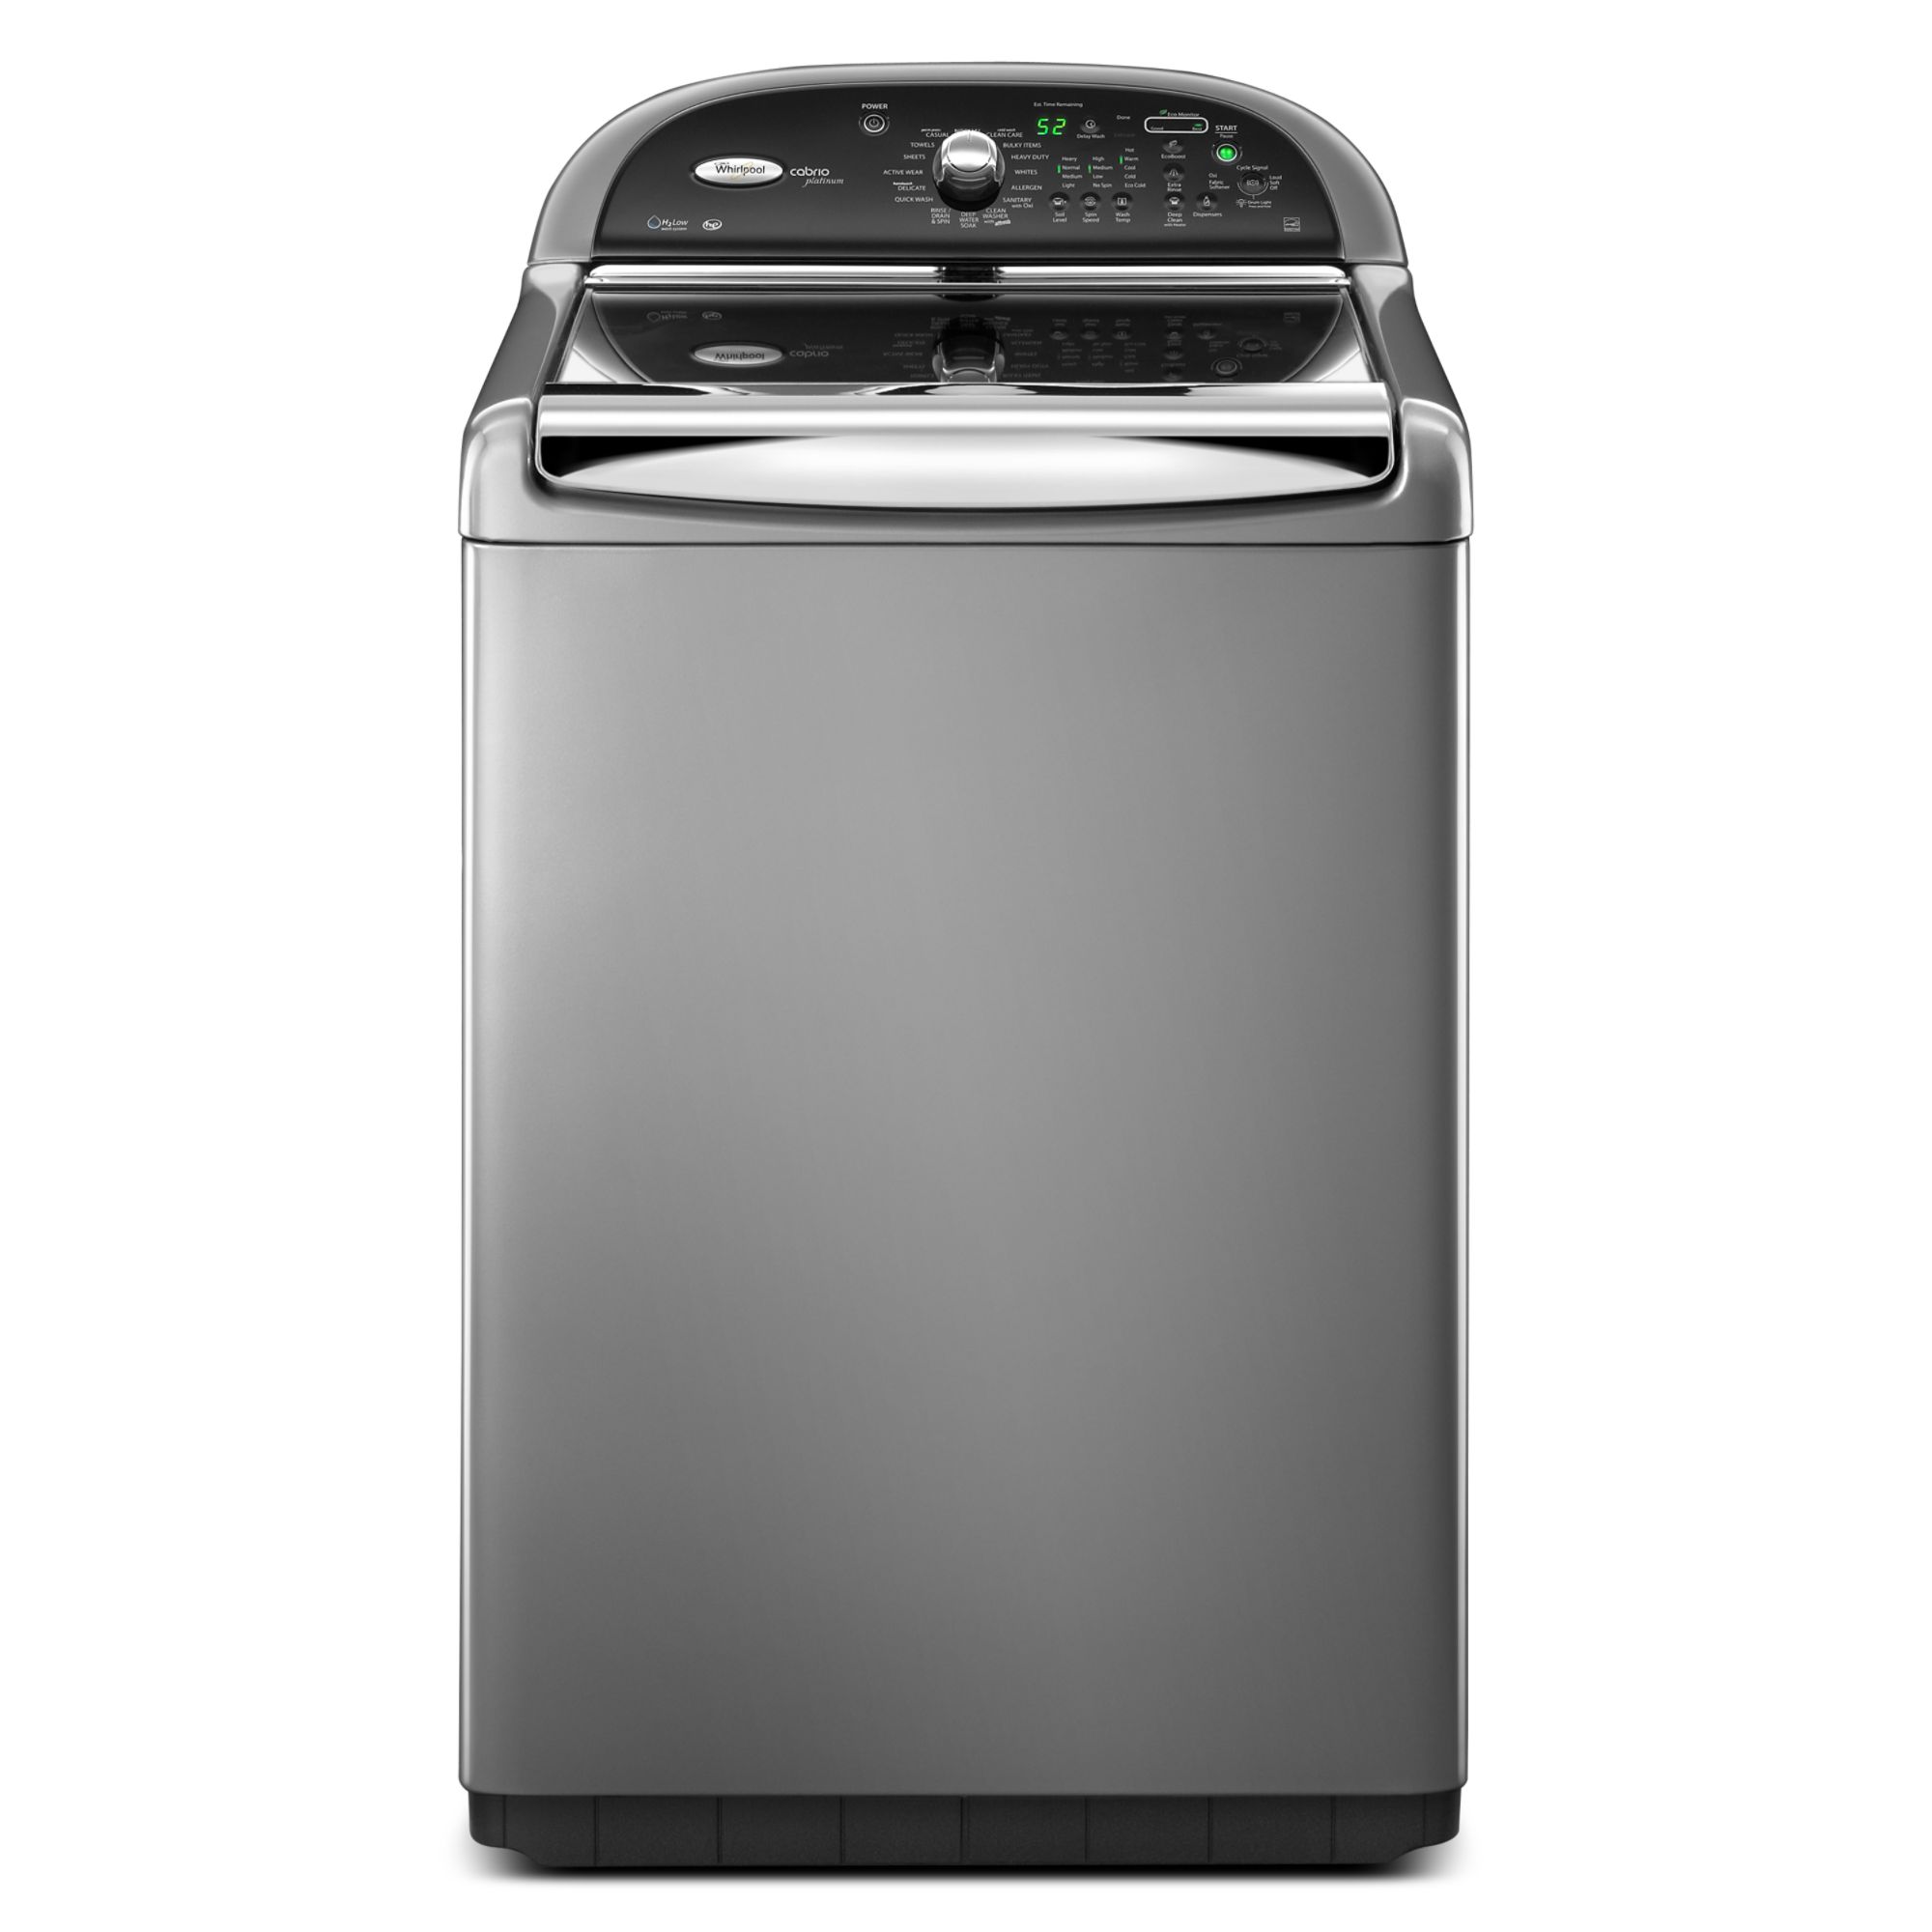 whirlpool-4-6-cu-ft-top-load-high-efficiency-washer-shop-your-way